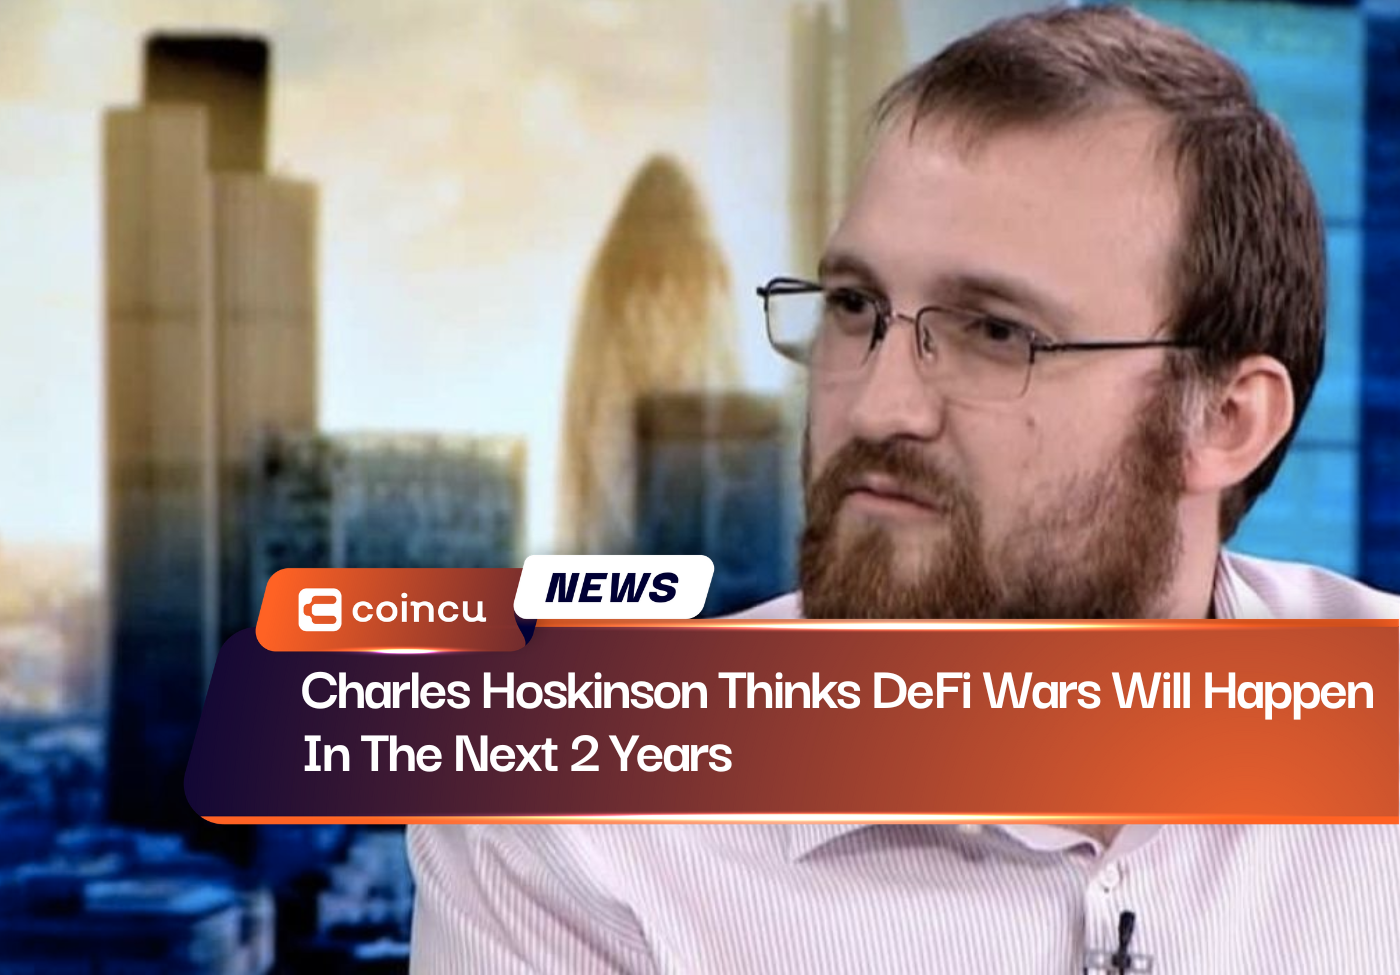 Charles Hoskinson Thinks DeFi Wars Will Happen In The Next 2 Years